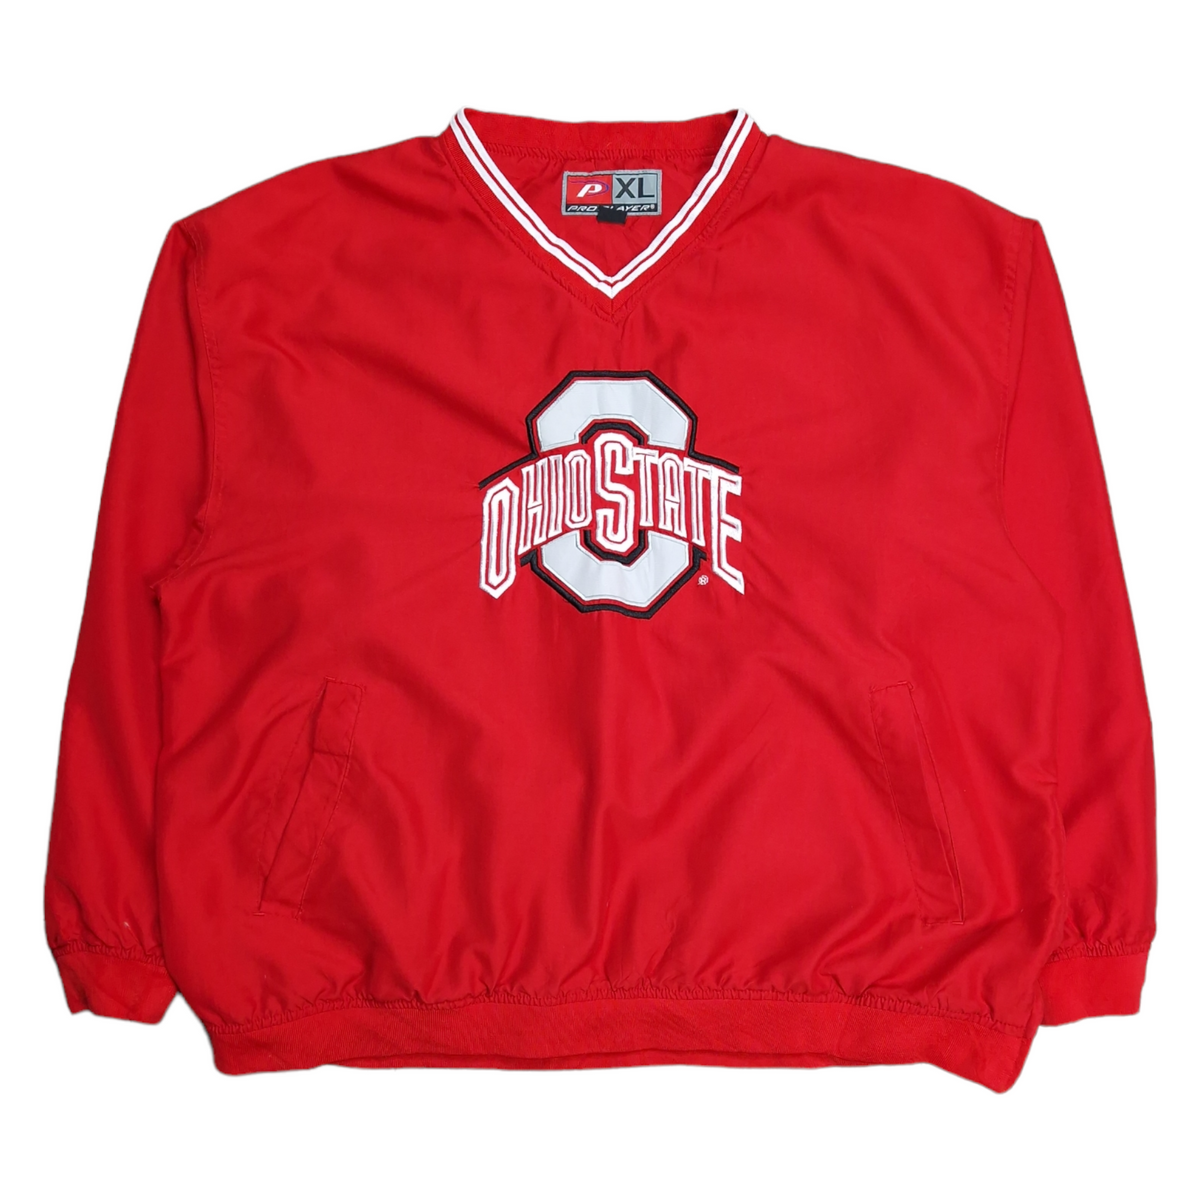 Y2K Pro Player Ohio State College Pullover - Size XL